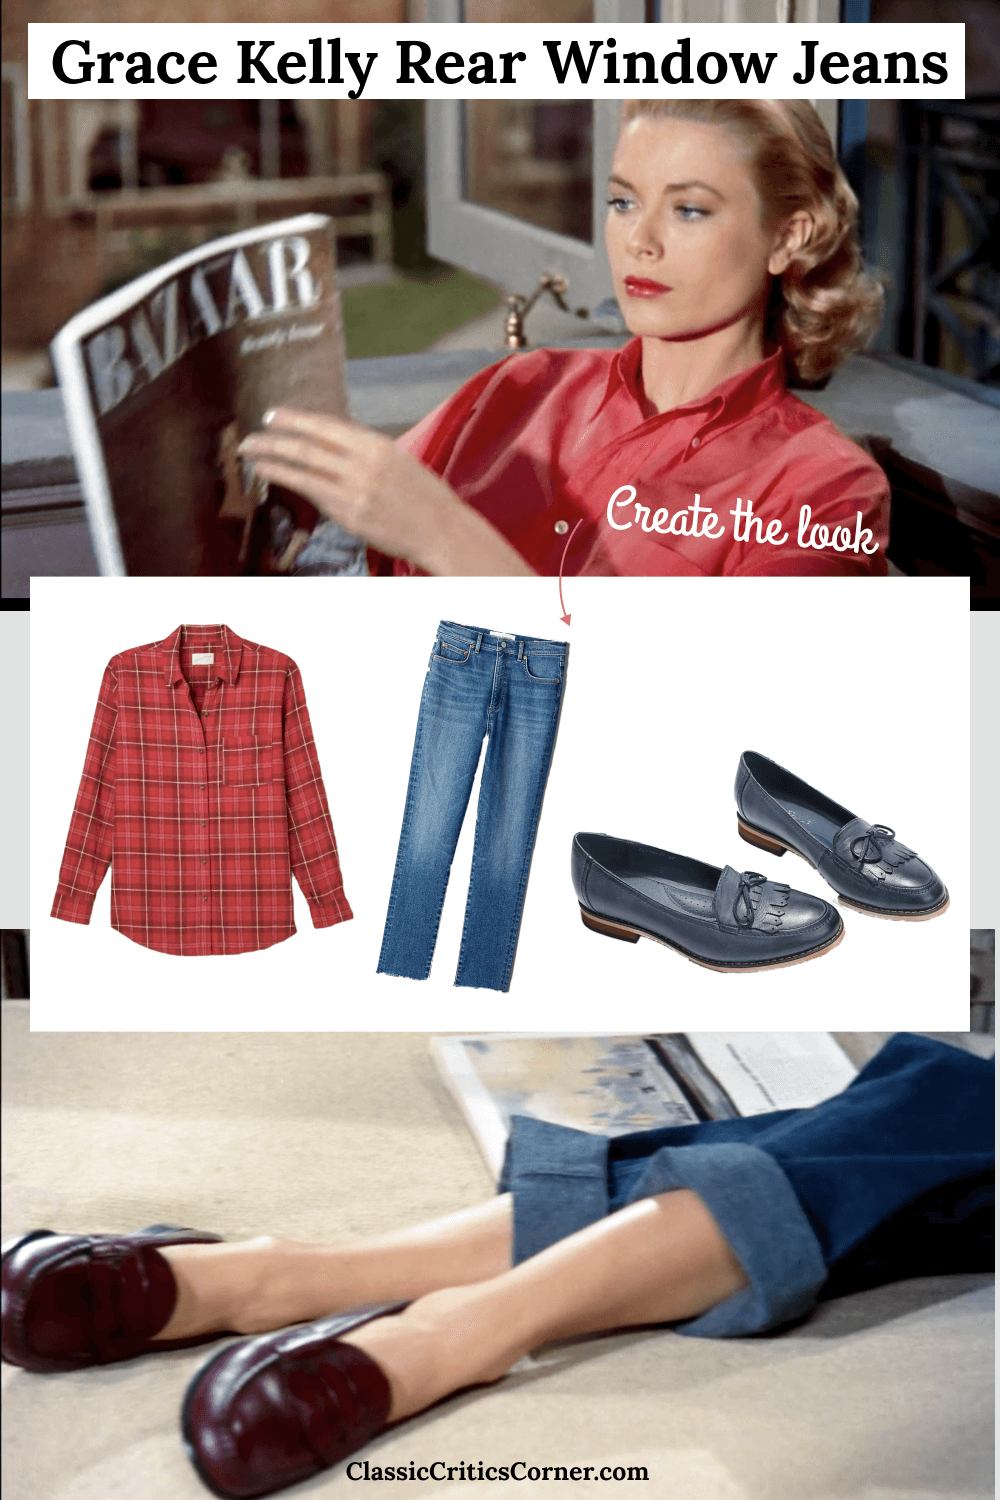 3 Insanely Chic Ways to Copy Grace Kelly Rear Window Jeans Outfit — Classic  Critics Corner - Vintage Fashion Inspiration including 1940s Fashion, 1950s  Fashion and Old Hollywood Glam icons like Grace